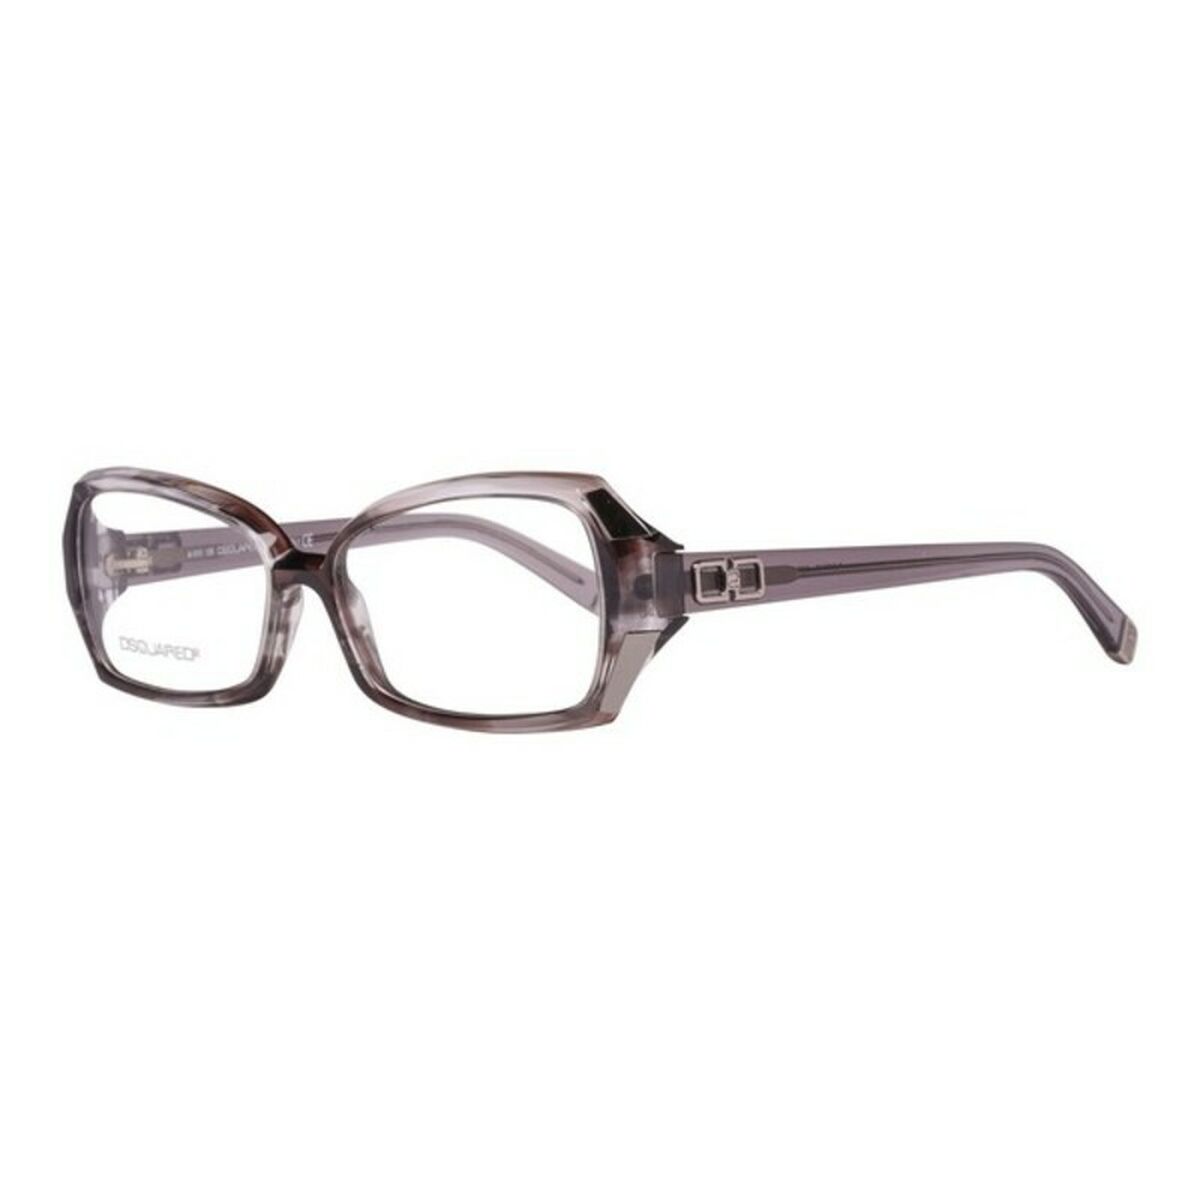 Ladies' Spectacle frame Dsquared2 DQ5049 54020 ø 54 mm